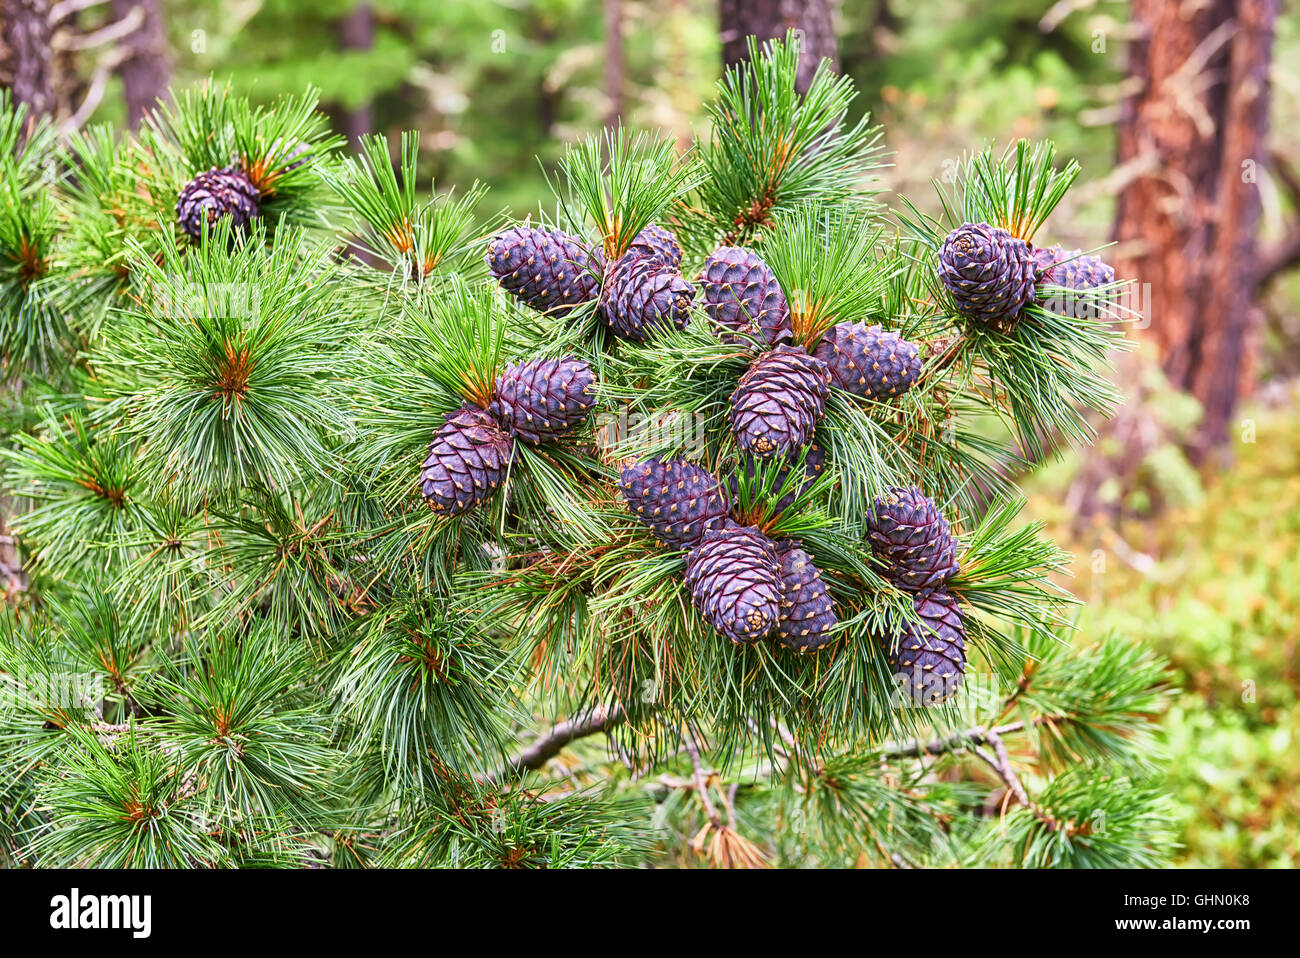 Cones of Siberian pine (Pinus sibirica) on top of tree branch. Shallow depth of field Stock Photo